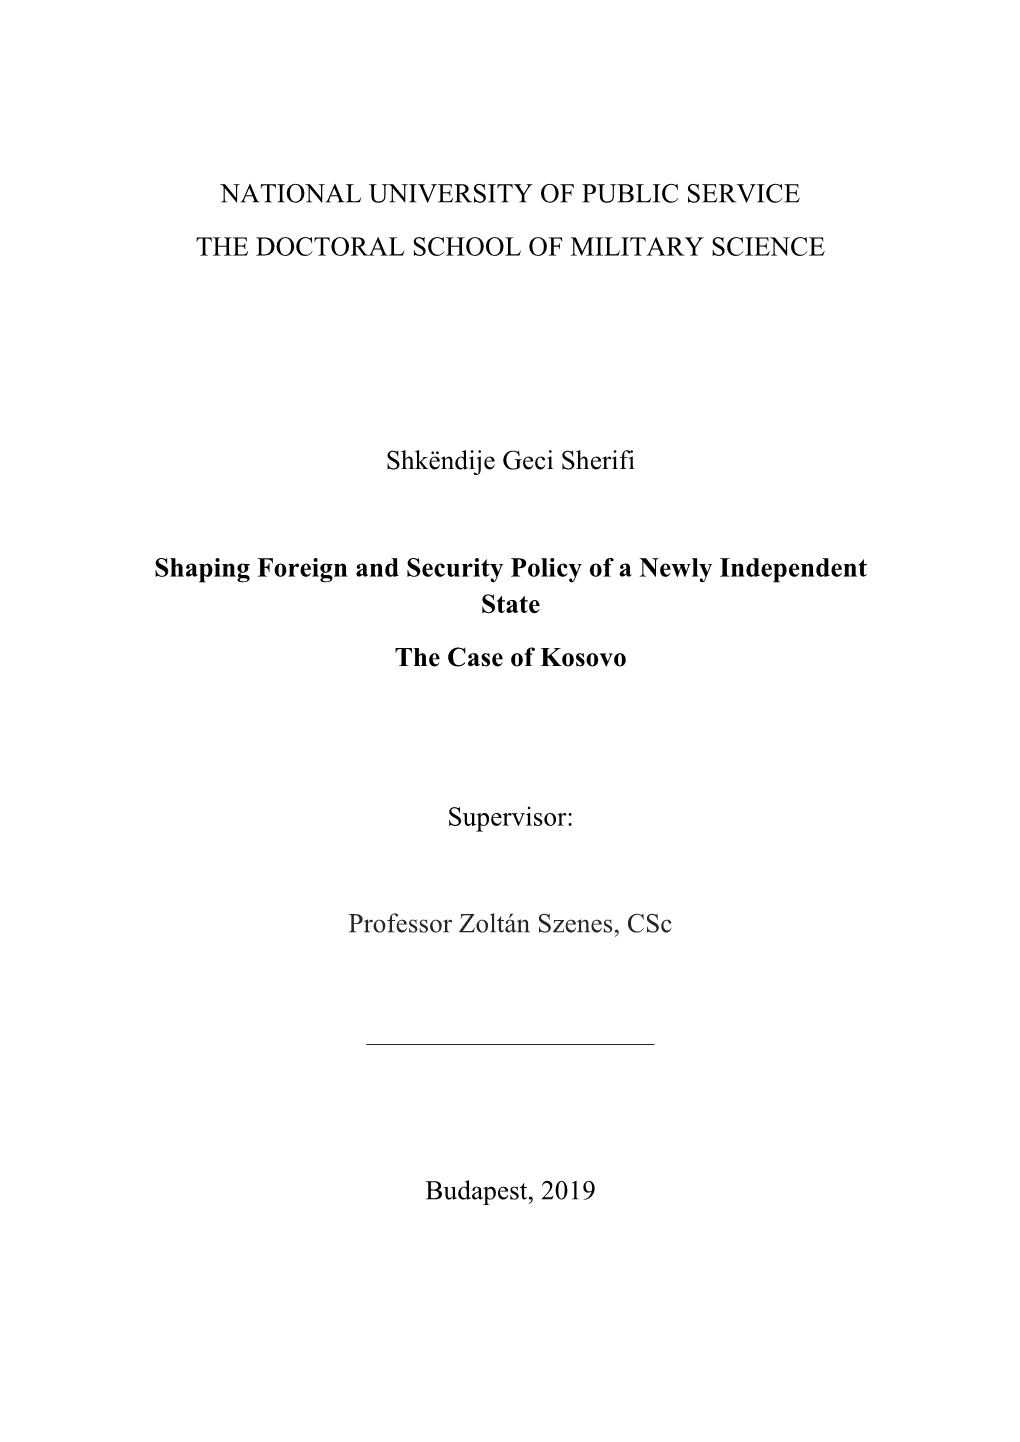 NATIONAL UNIVERSITY of PUBLIC SERVICE the DOCTORAL SCHOOL of MILITARY SCIENCE Shkëndije Geci Sherifi Shaping Foreign and Securi